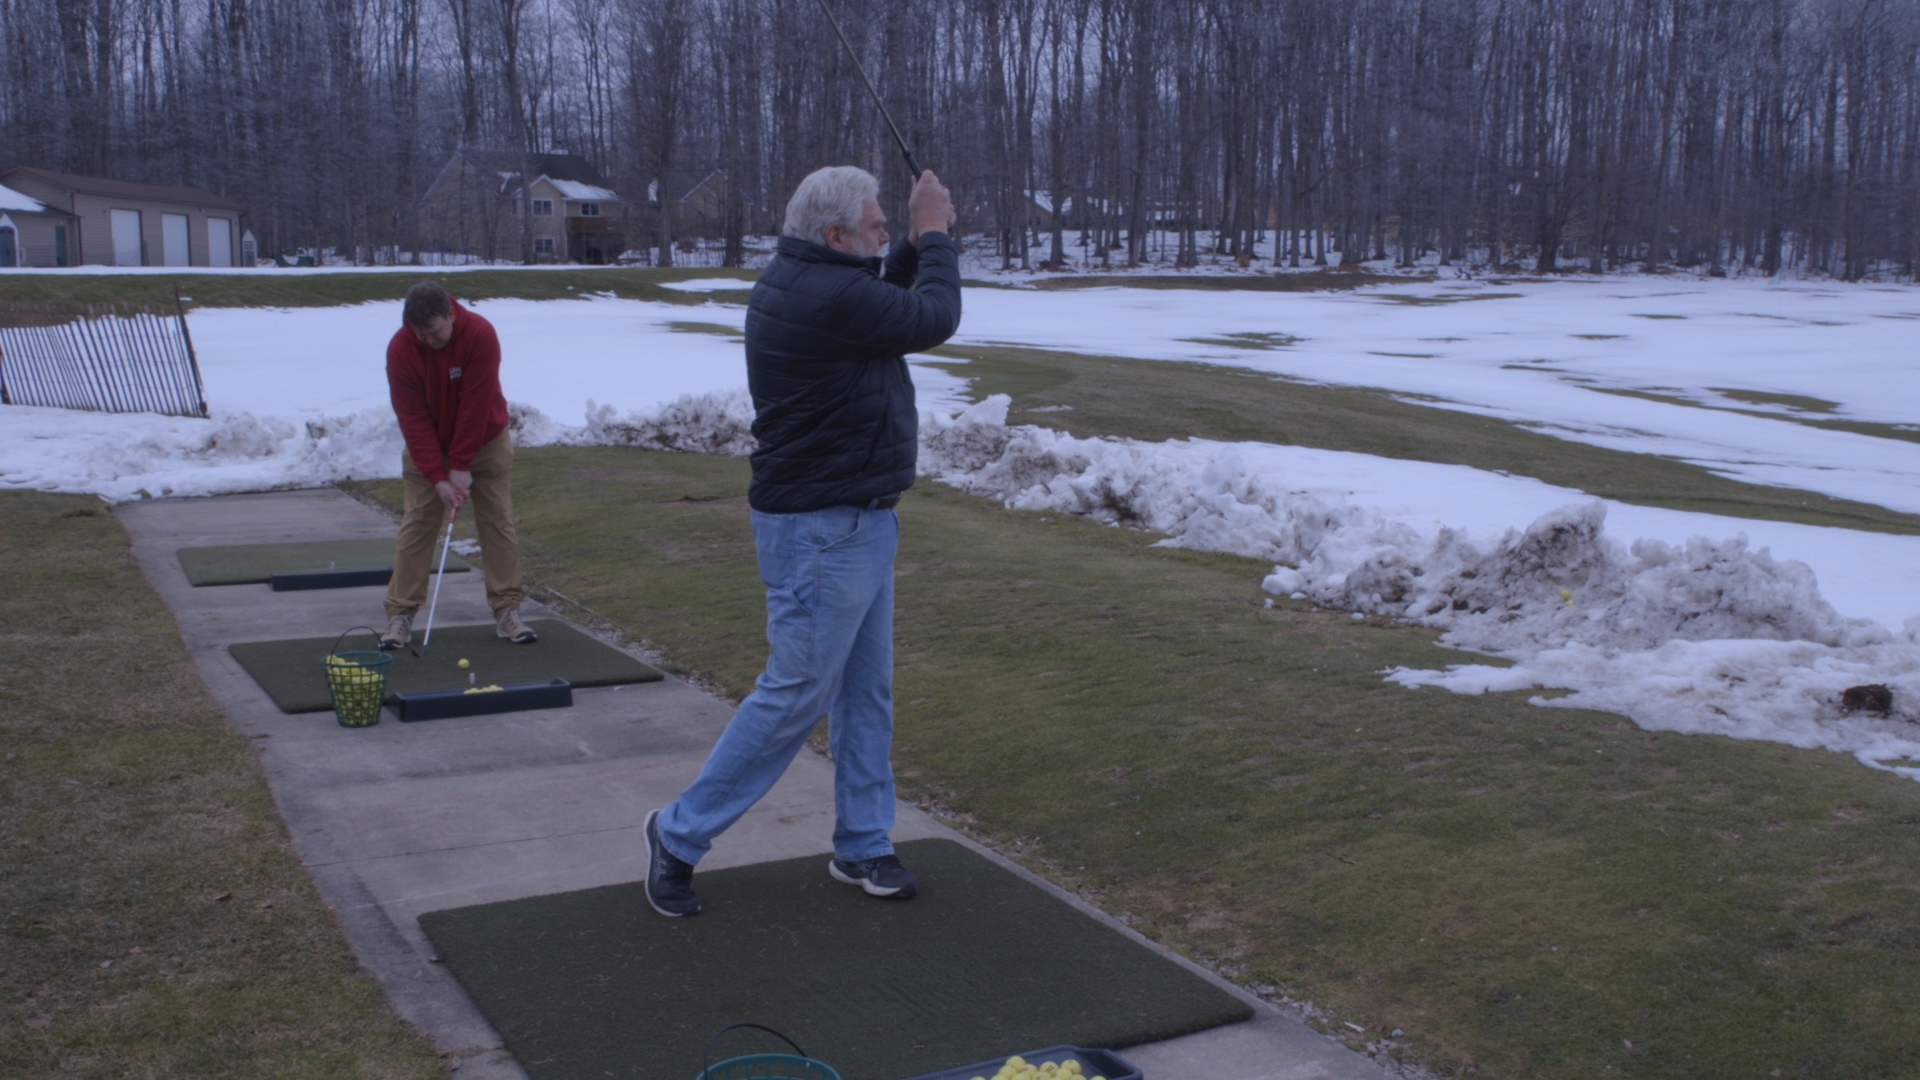 Bay Meadows Family Golf Course opens driving range as lack of snow brings opportunity